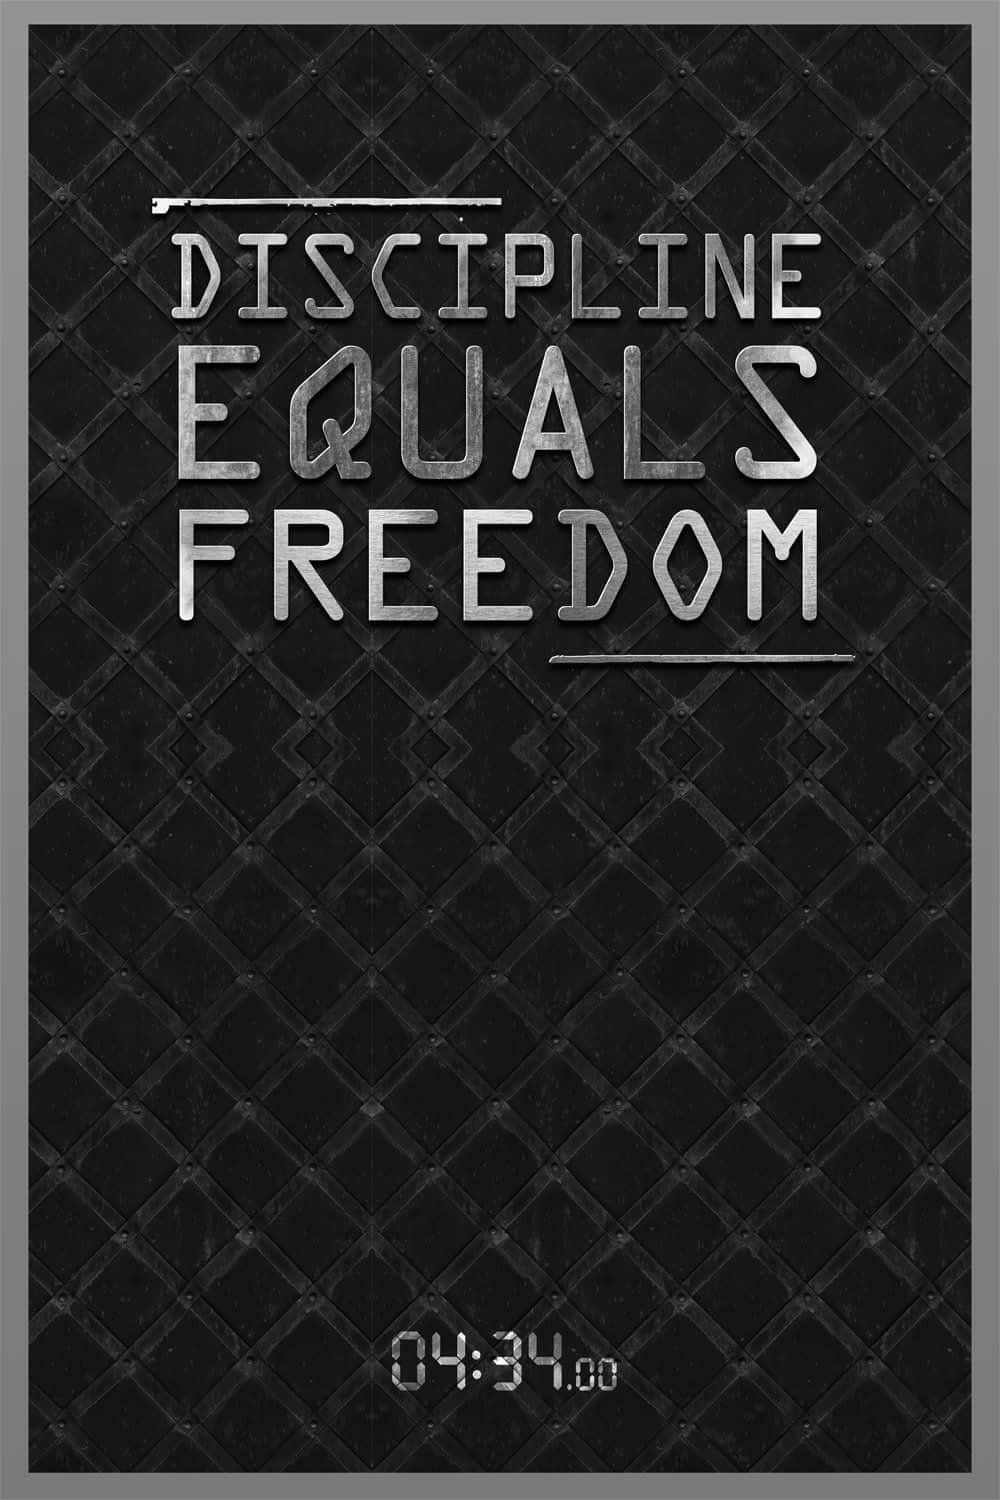 Discipline Equals Freedom - A Black And White Poster Wallpaper